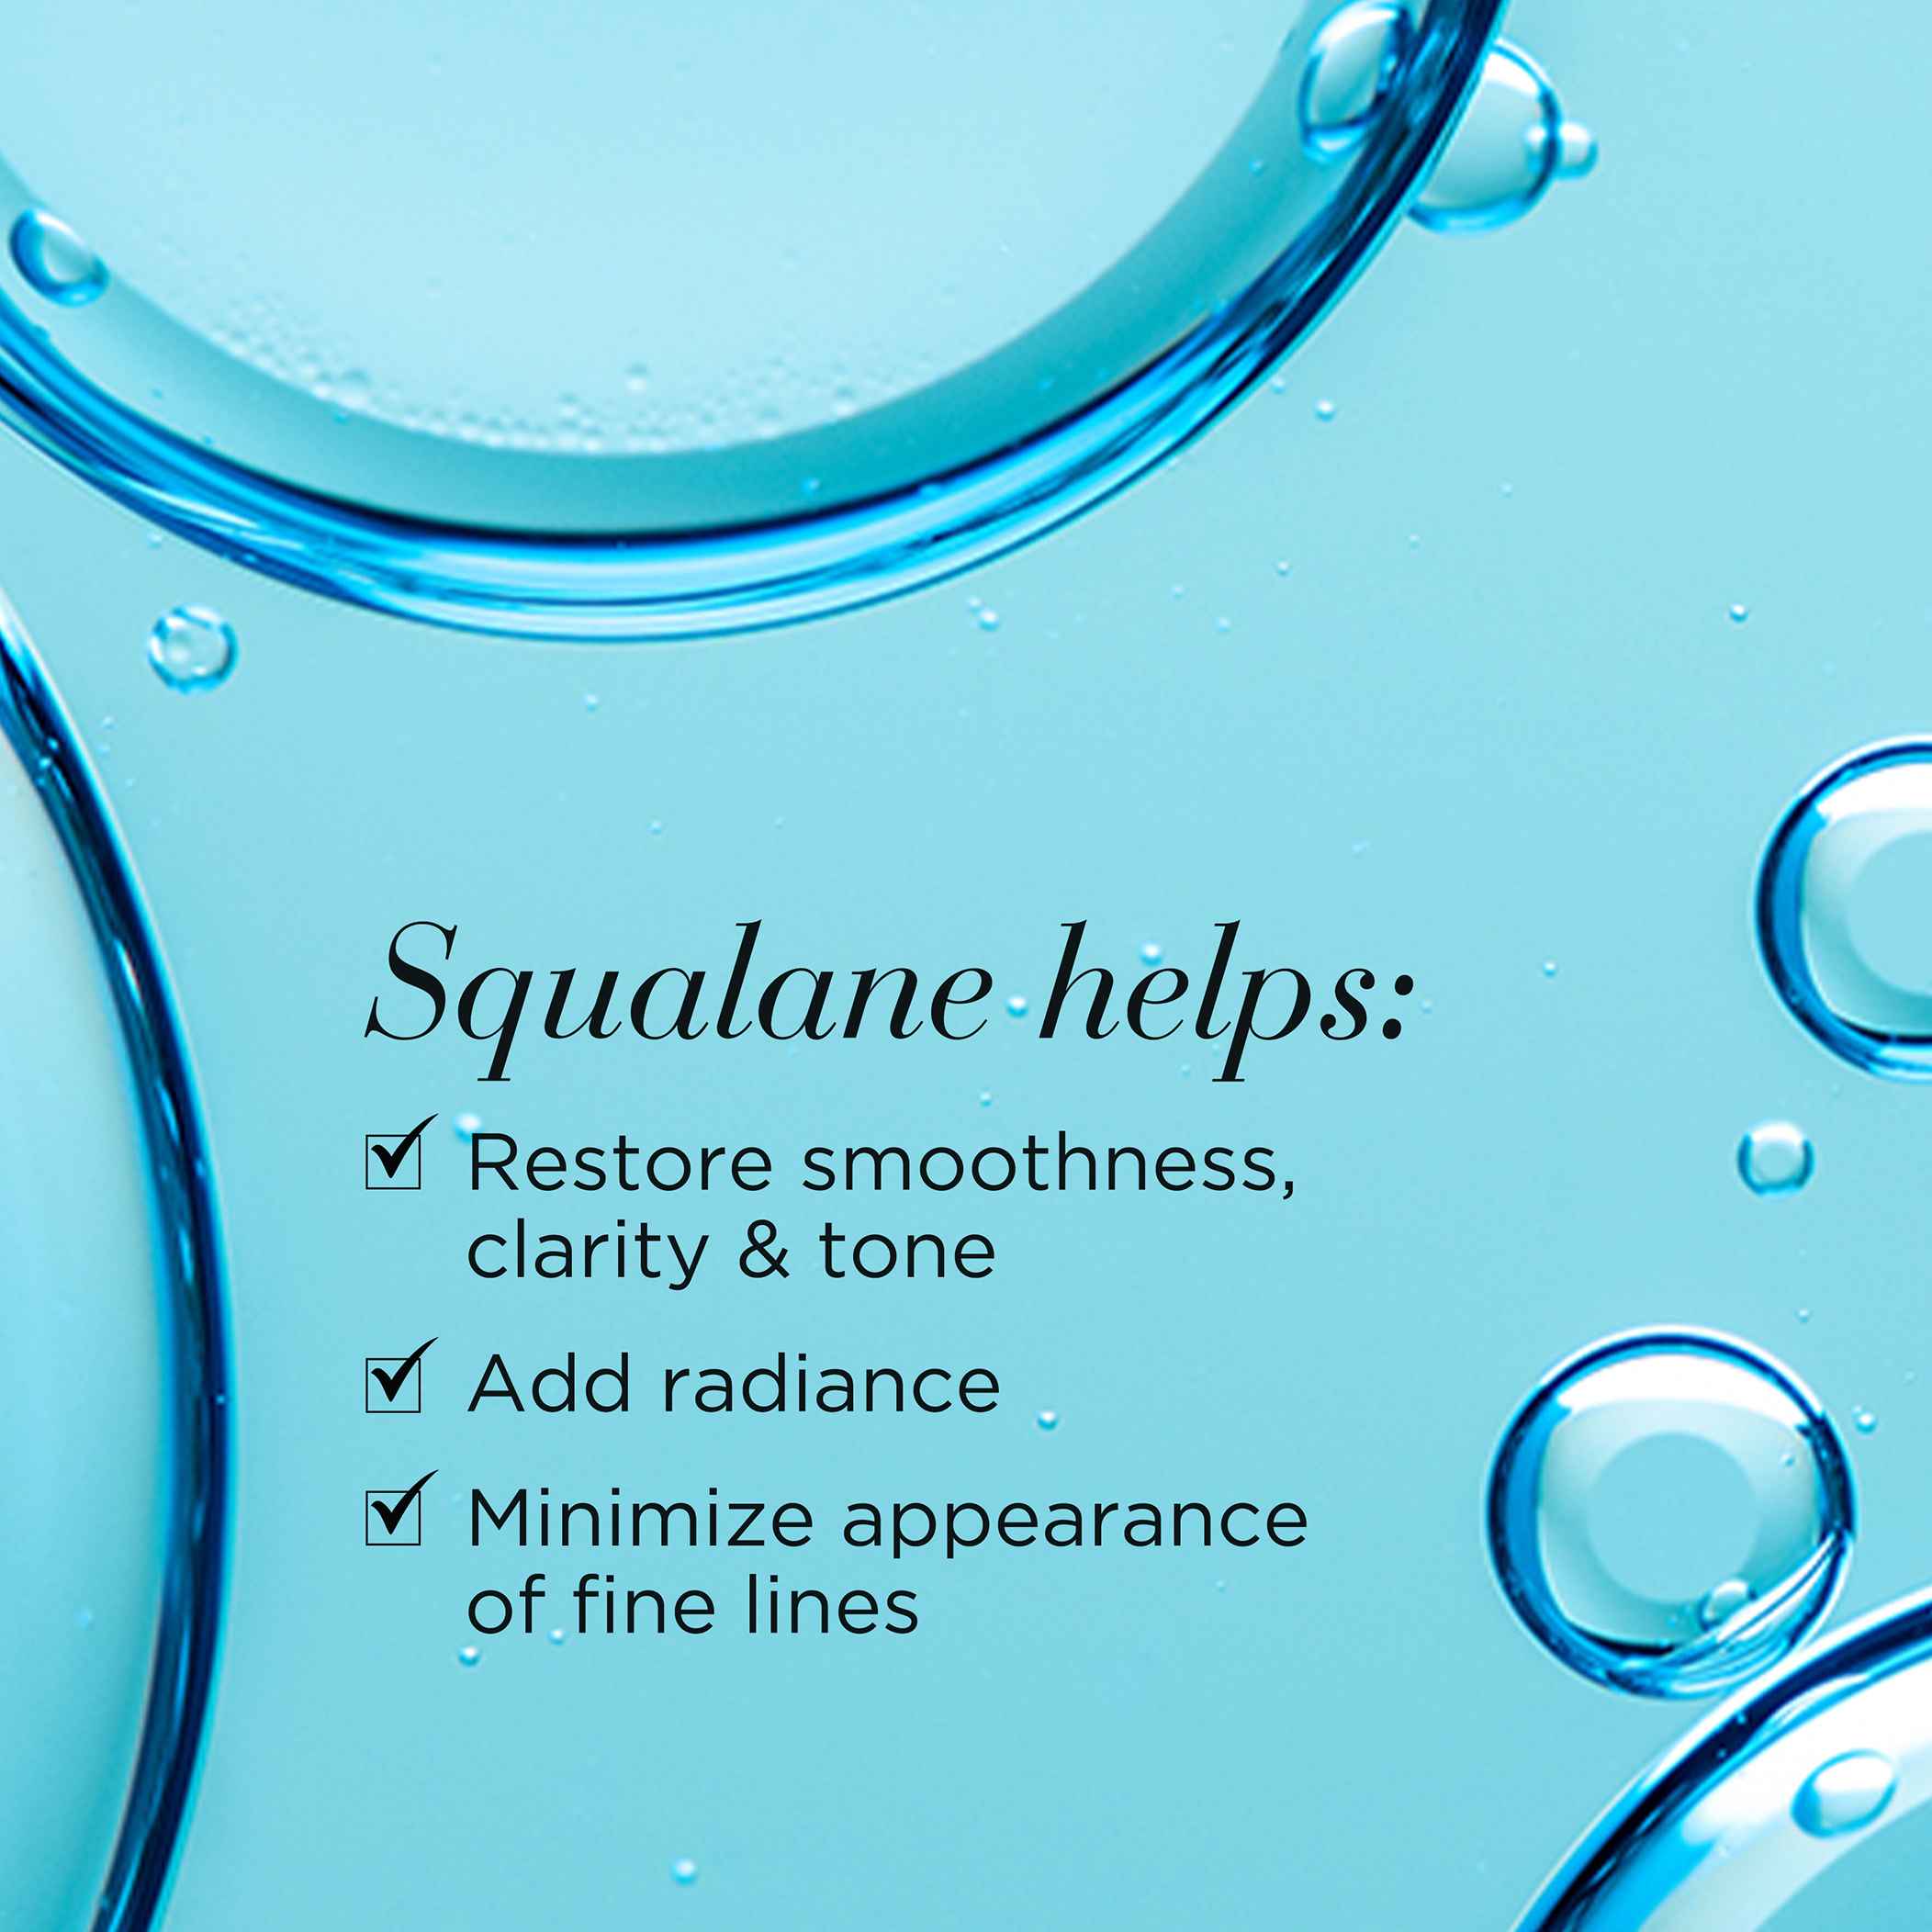 Squalane helps restore smoothness, clarity and tone, add radiance and minimize appearance of fine lines